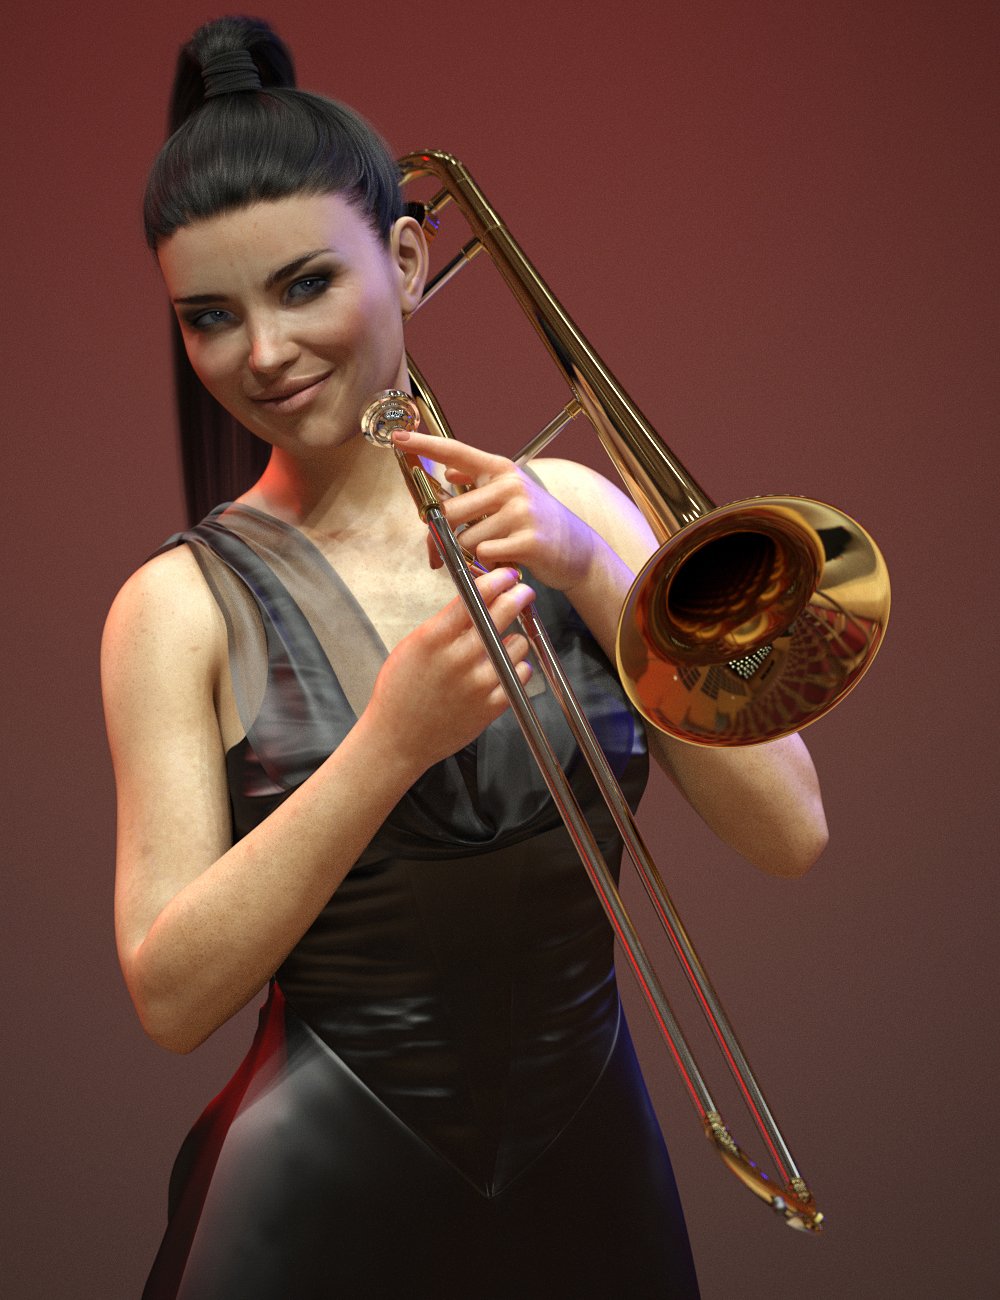 HD Trombone and Poses for Genesis 8 by: Protozoon, 3D Models by Daz 3D